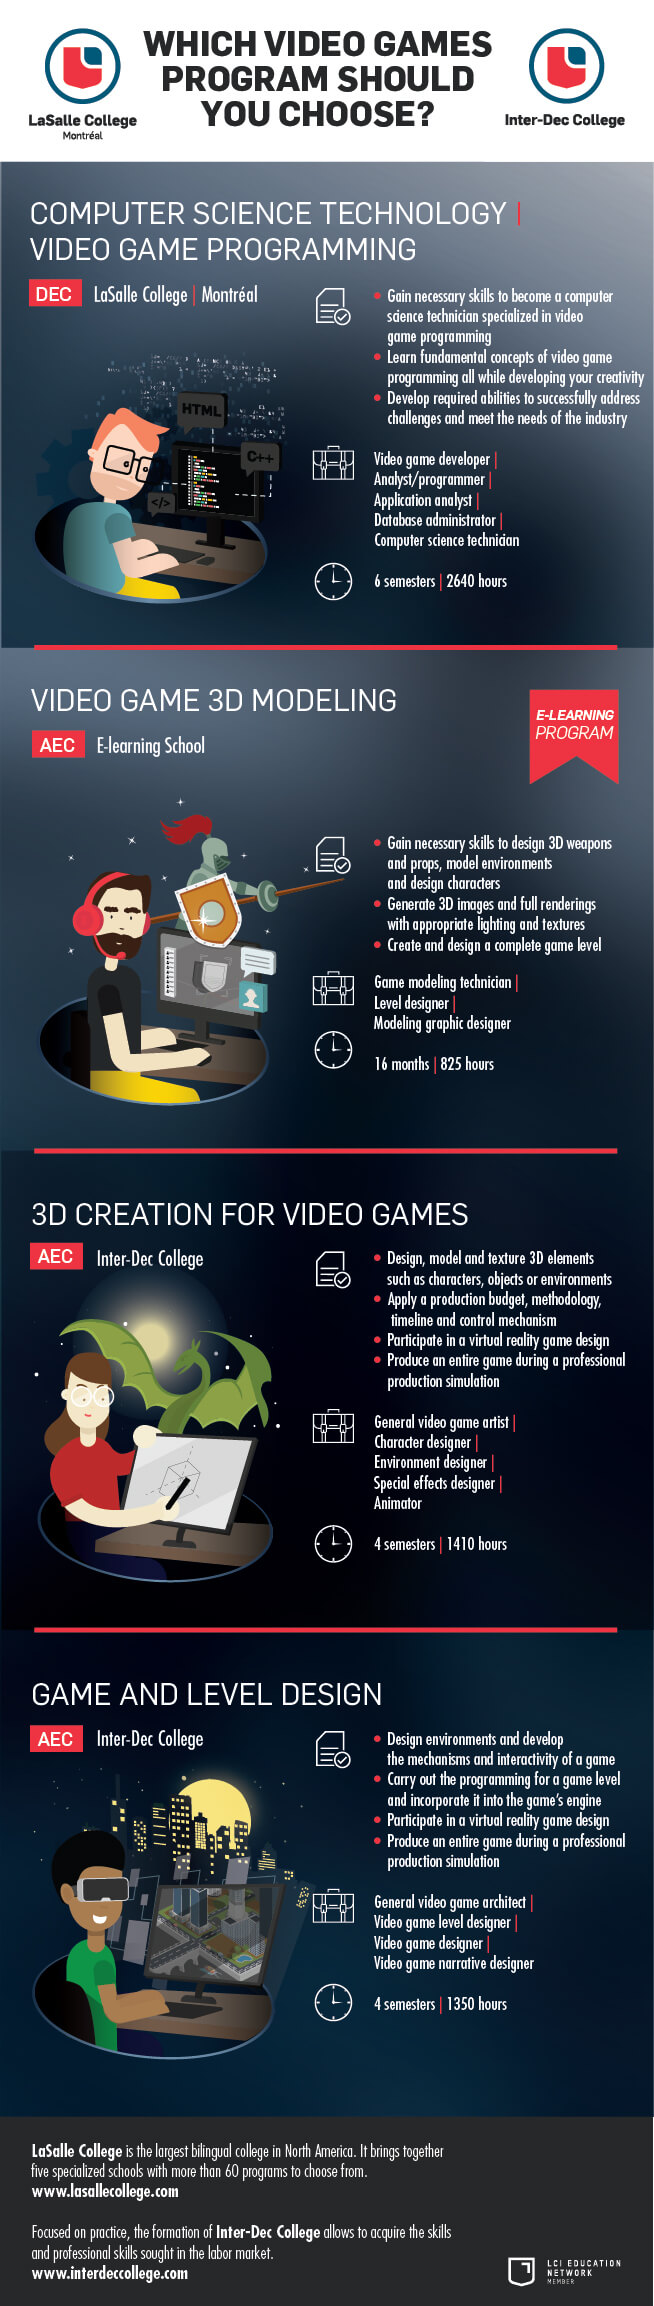 Video Games Programs Comparative Infography